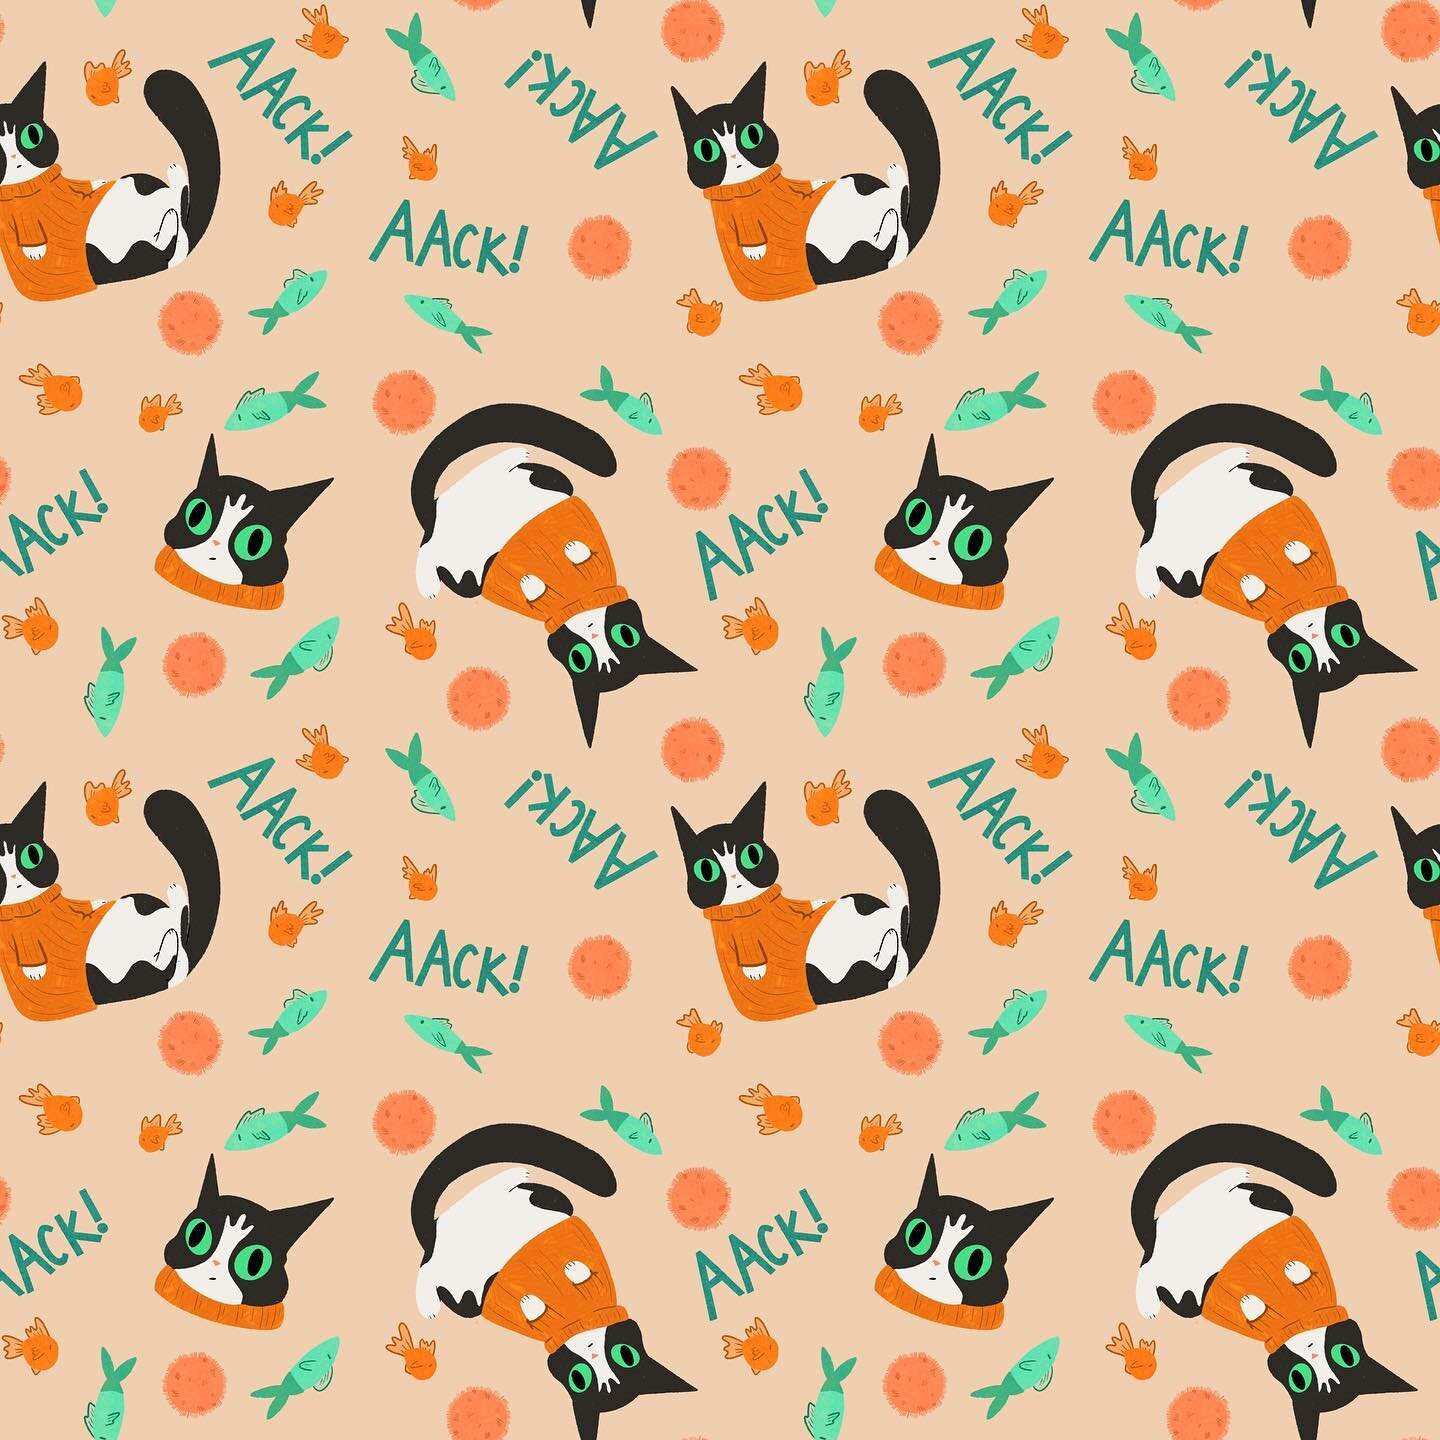 A quick little pattern I did of Sheldon, I still need to buy him an orange sweater in real life #pattern #patterndesign #illustration #illustrator #procreate #catsofinstagram #ipadpro #instaart #instaartist #thepalelittlefox #catillustration #catillu